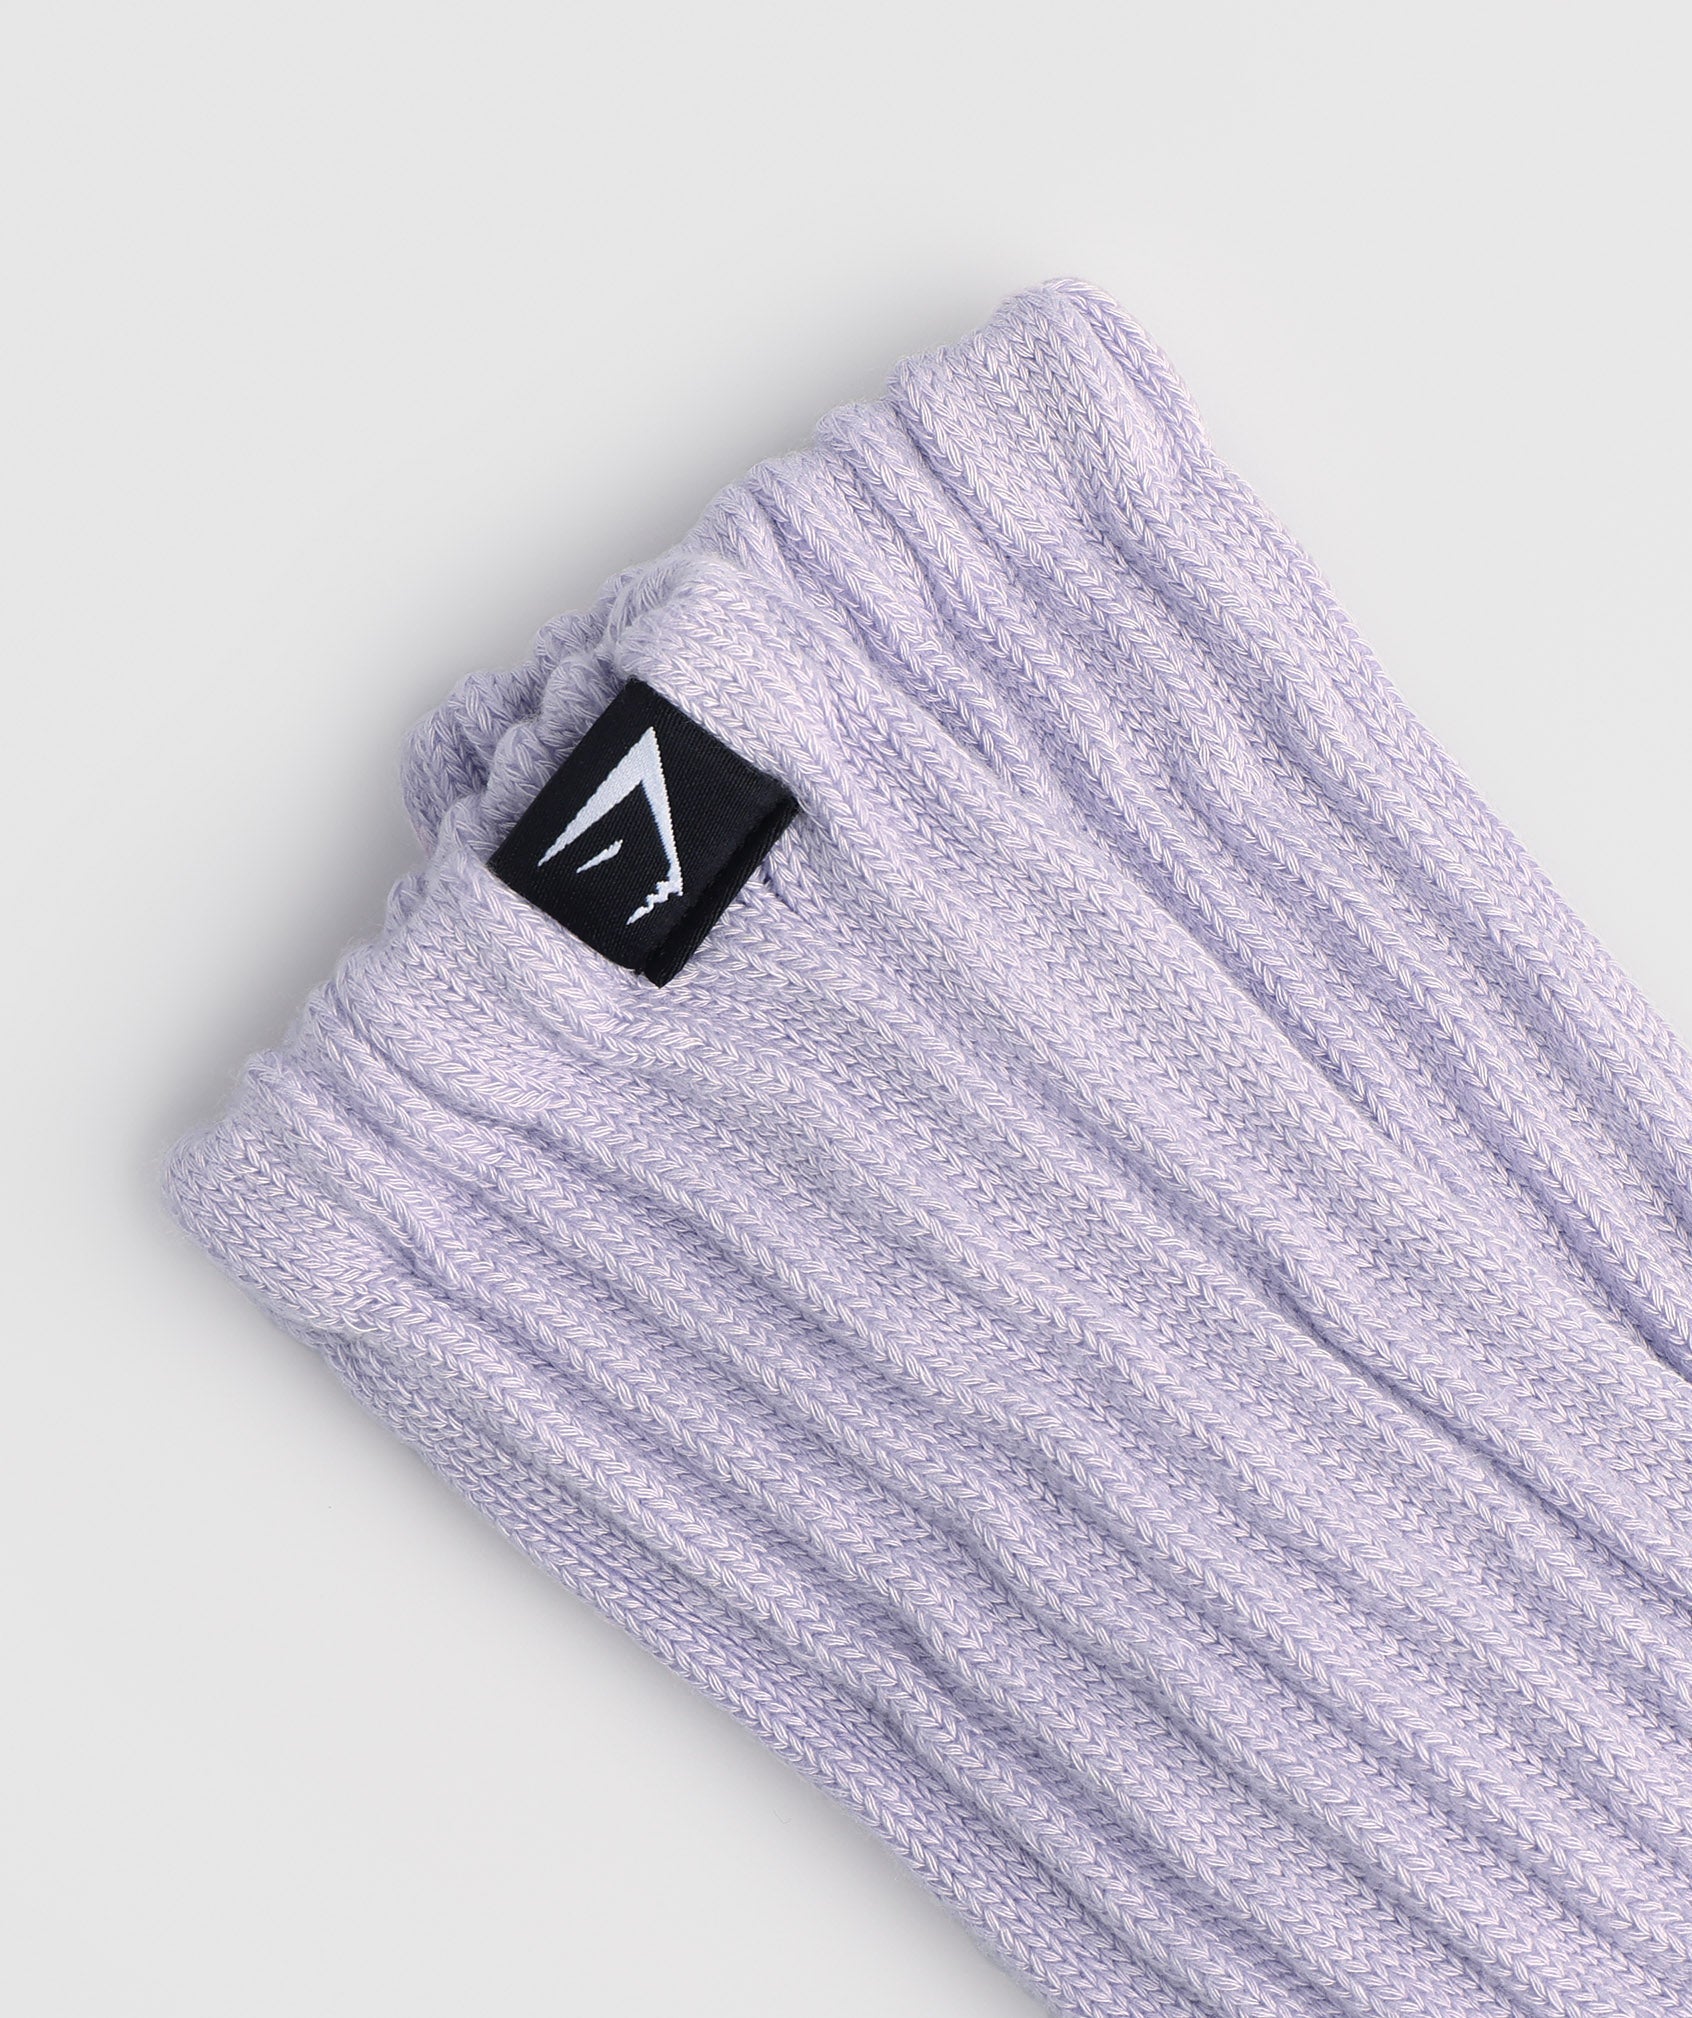 Comfy Rest Day Socks in Soft Lilac - view 2